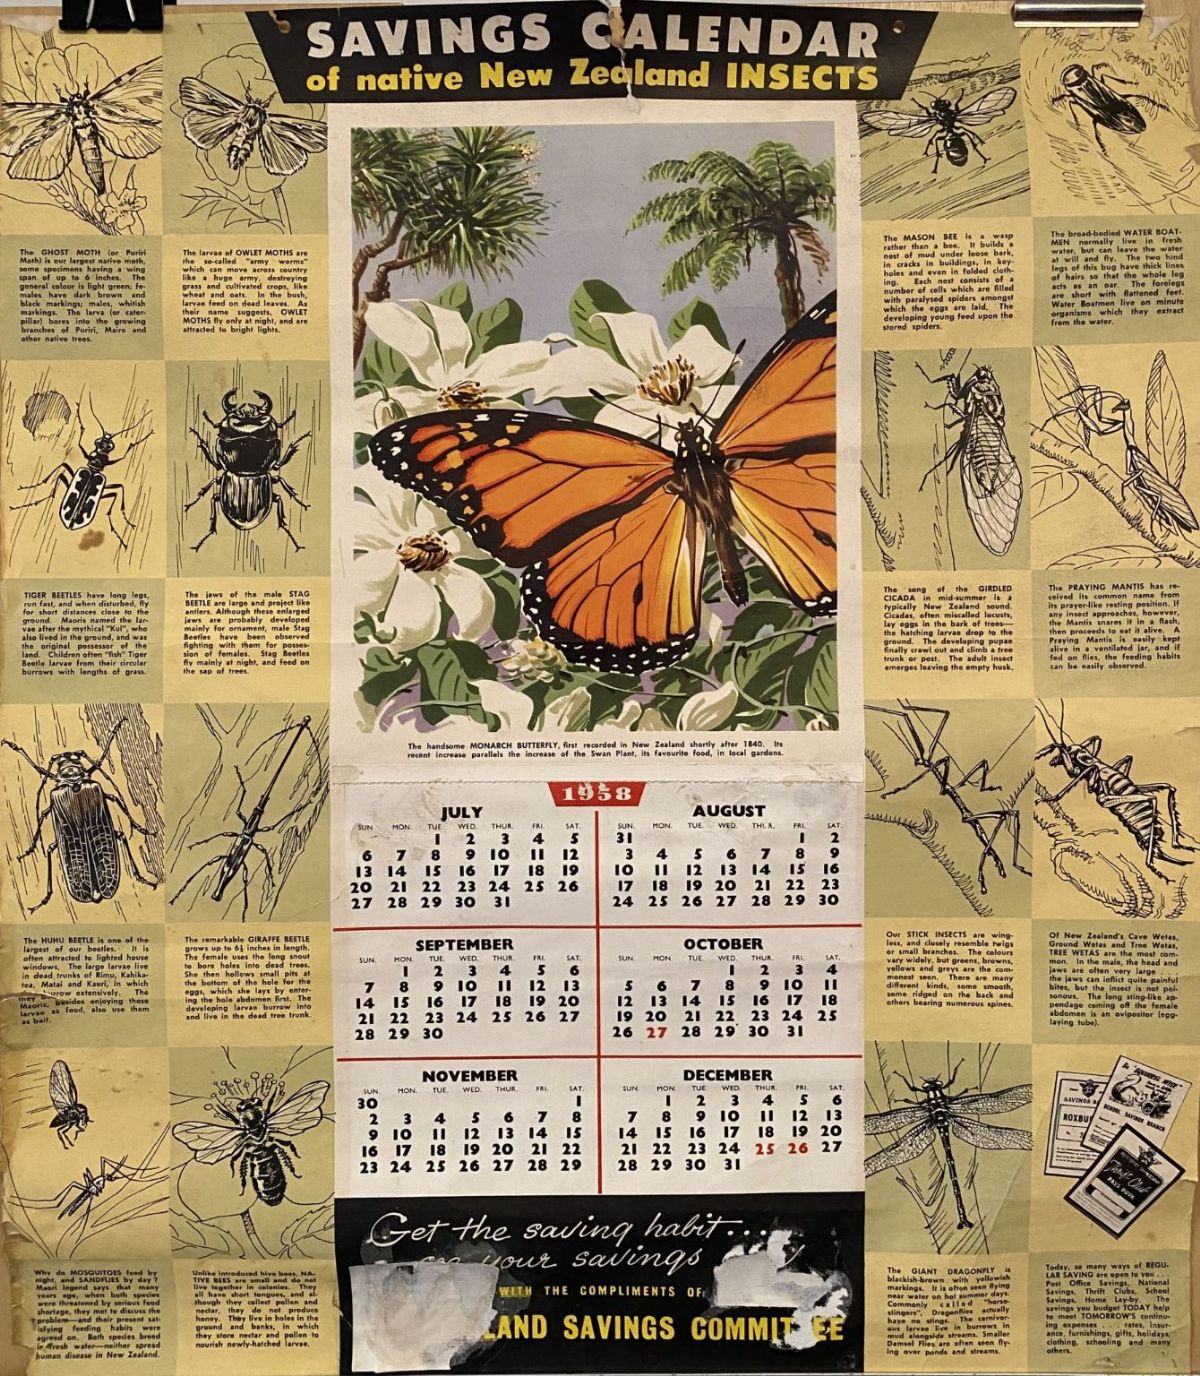 VINTAGE POSTER: Savings Calendar of Native Insects / NZ Savings Committee 1958